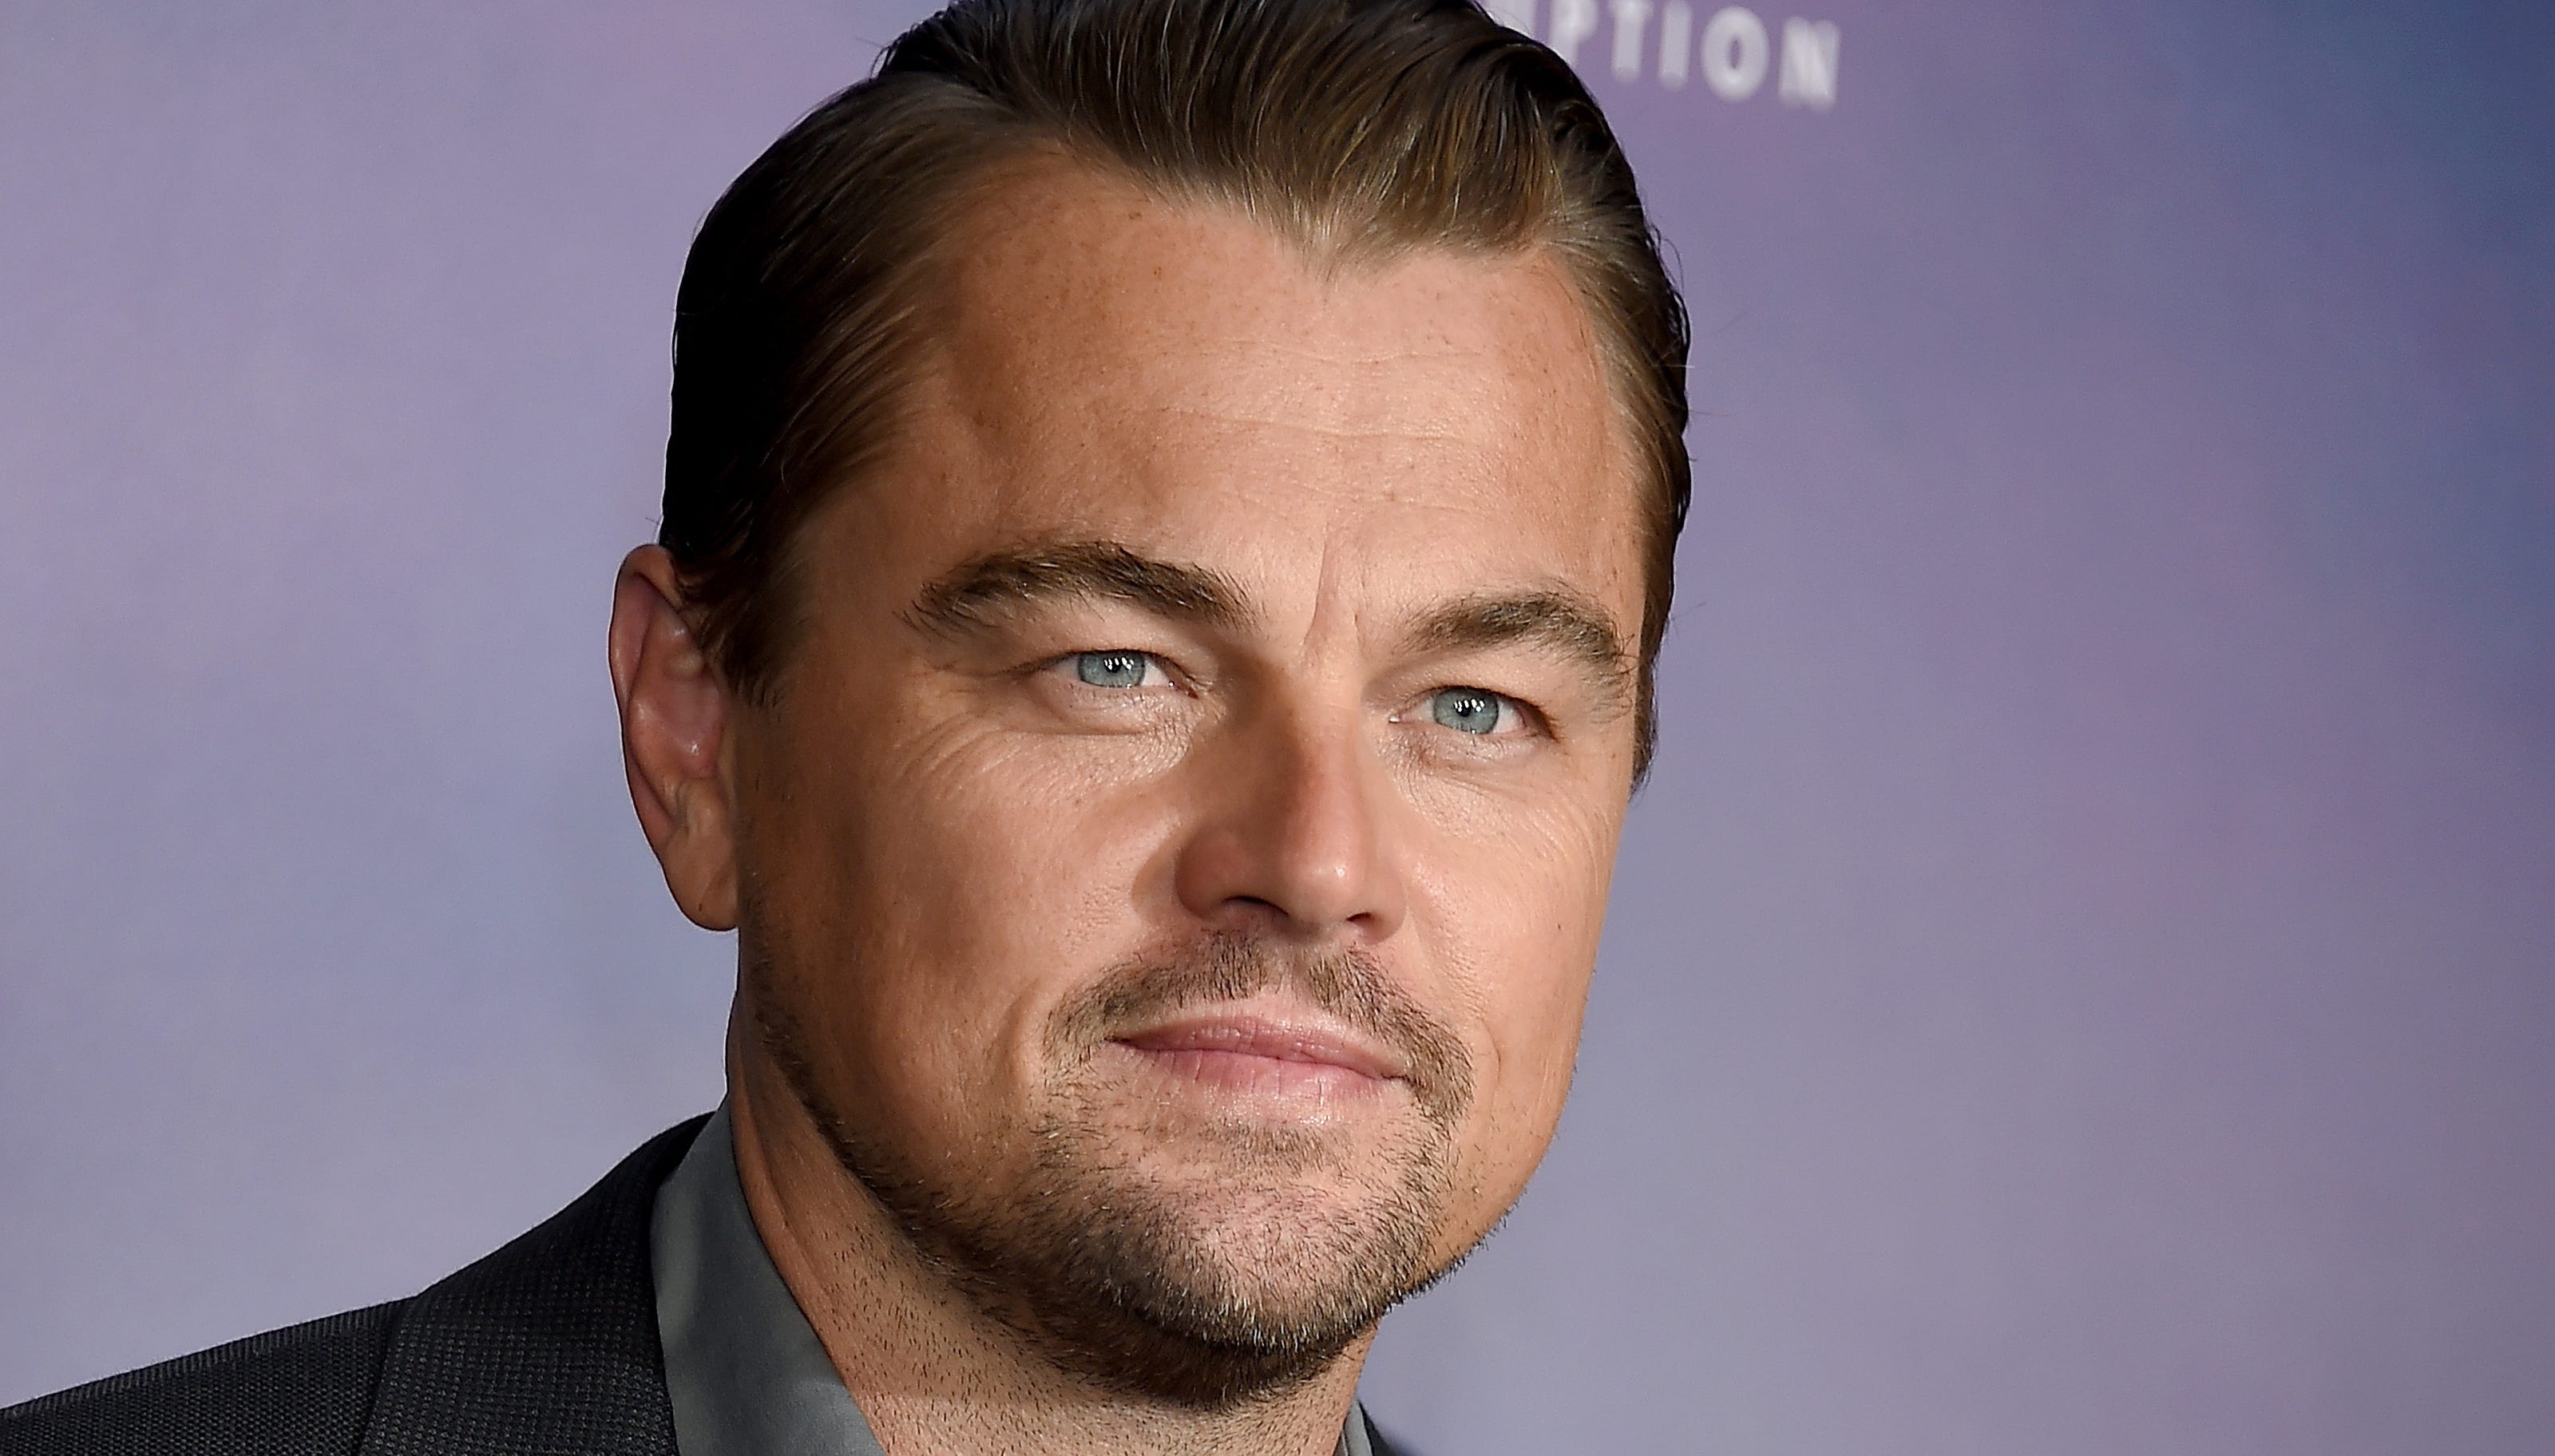 Leonardo DiCaprio's viral volleyball shot to the face is everyone in g...